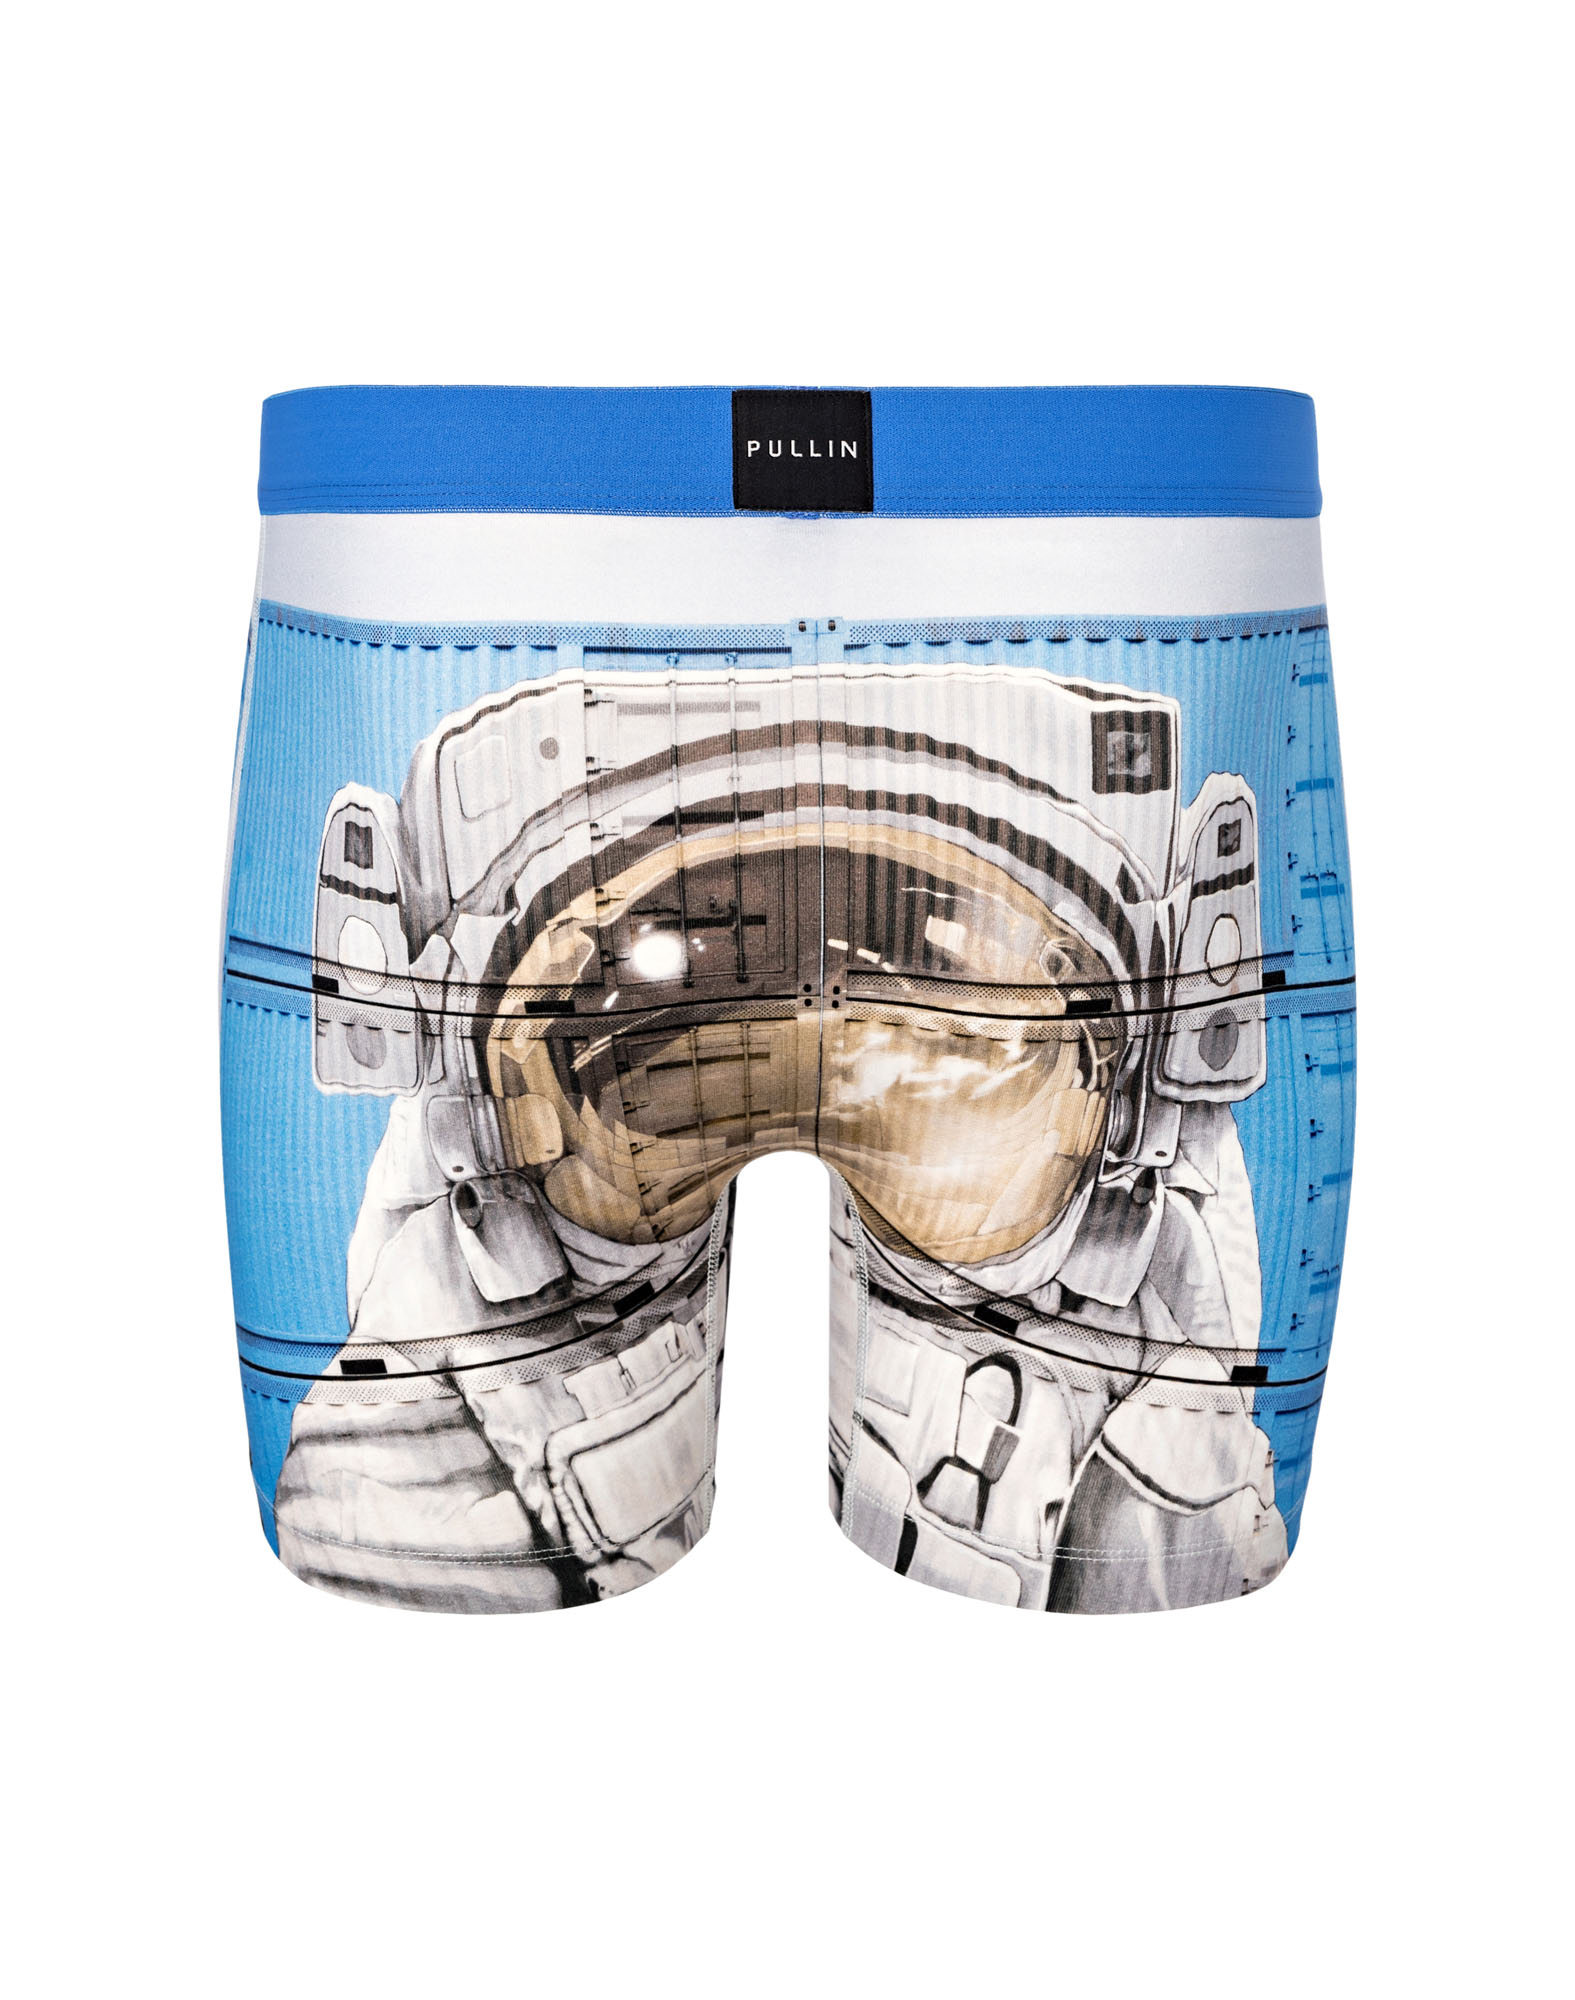 Men's trunk FASHION 2 ARMSTRONG